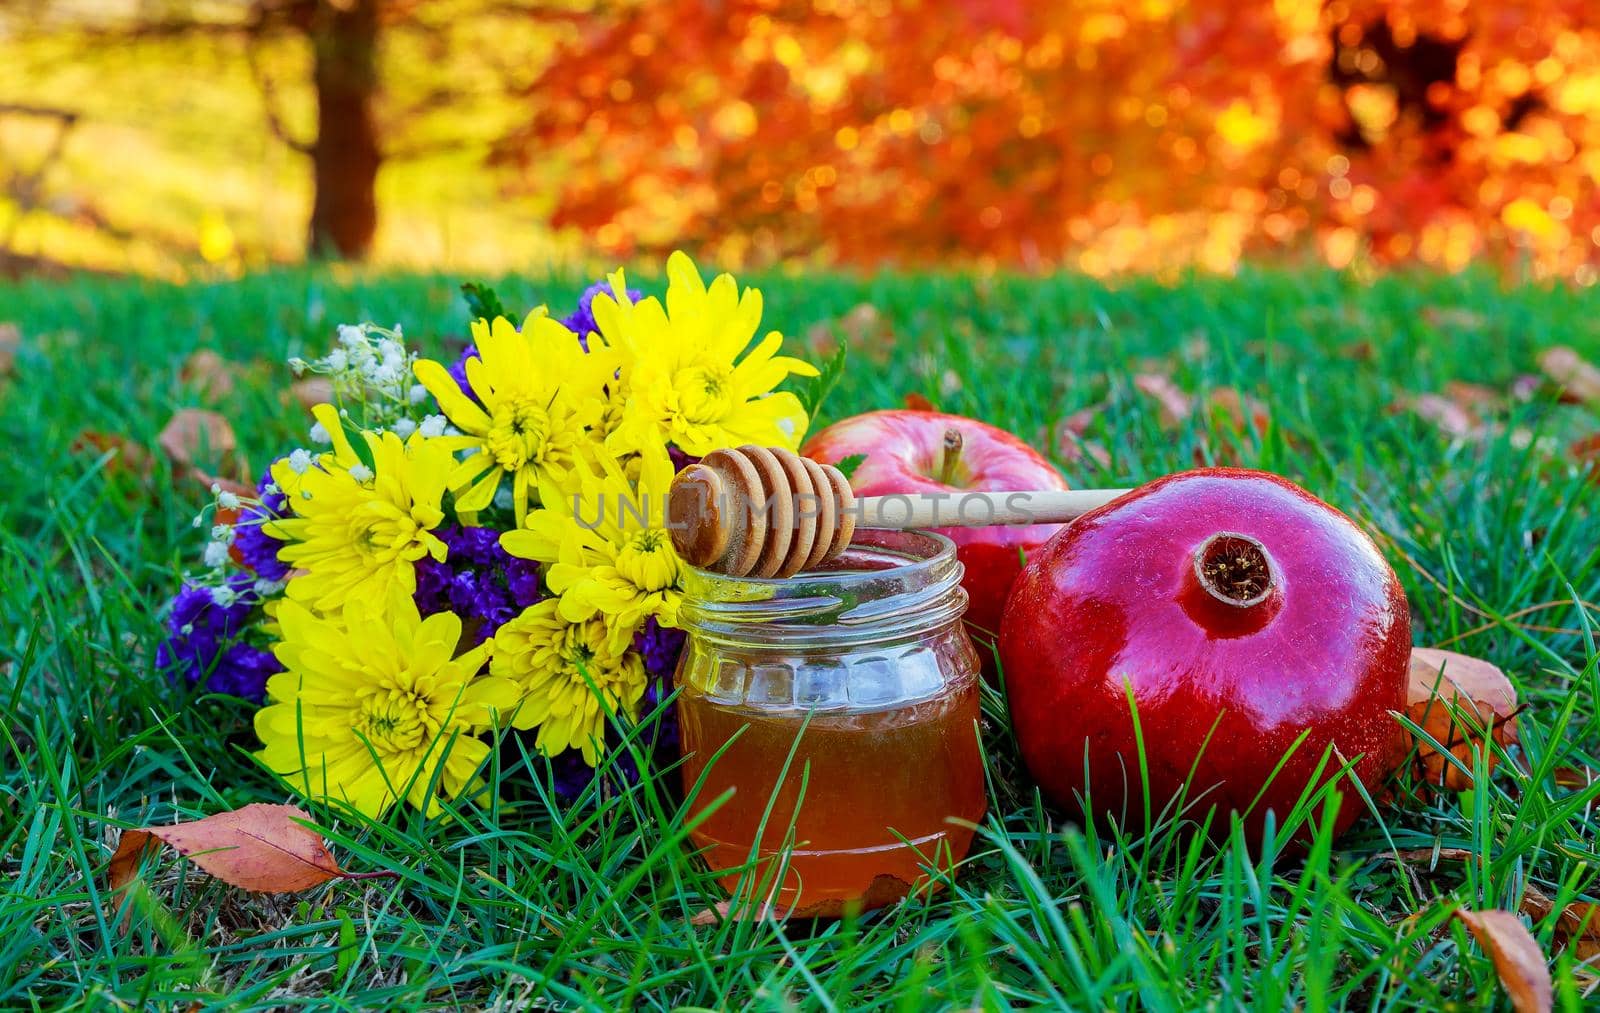 rosh hashanah jewesh holiday concept - honey, apple and pomegranate lying in the grass traditional symbols.